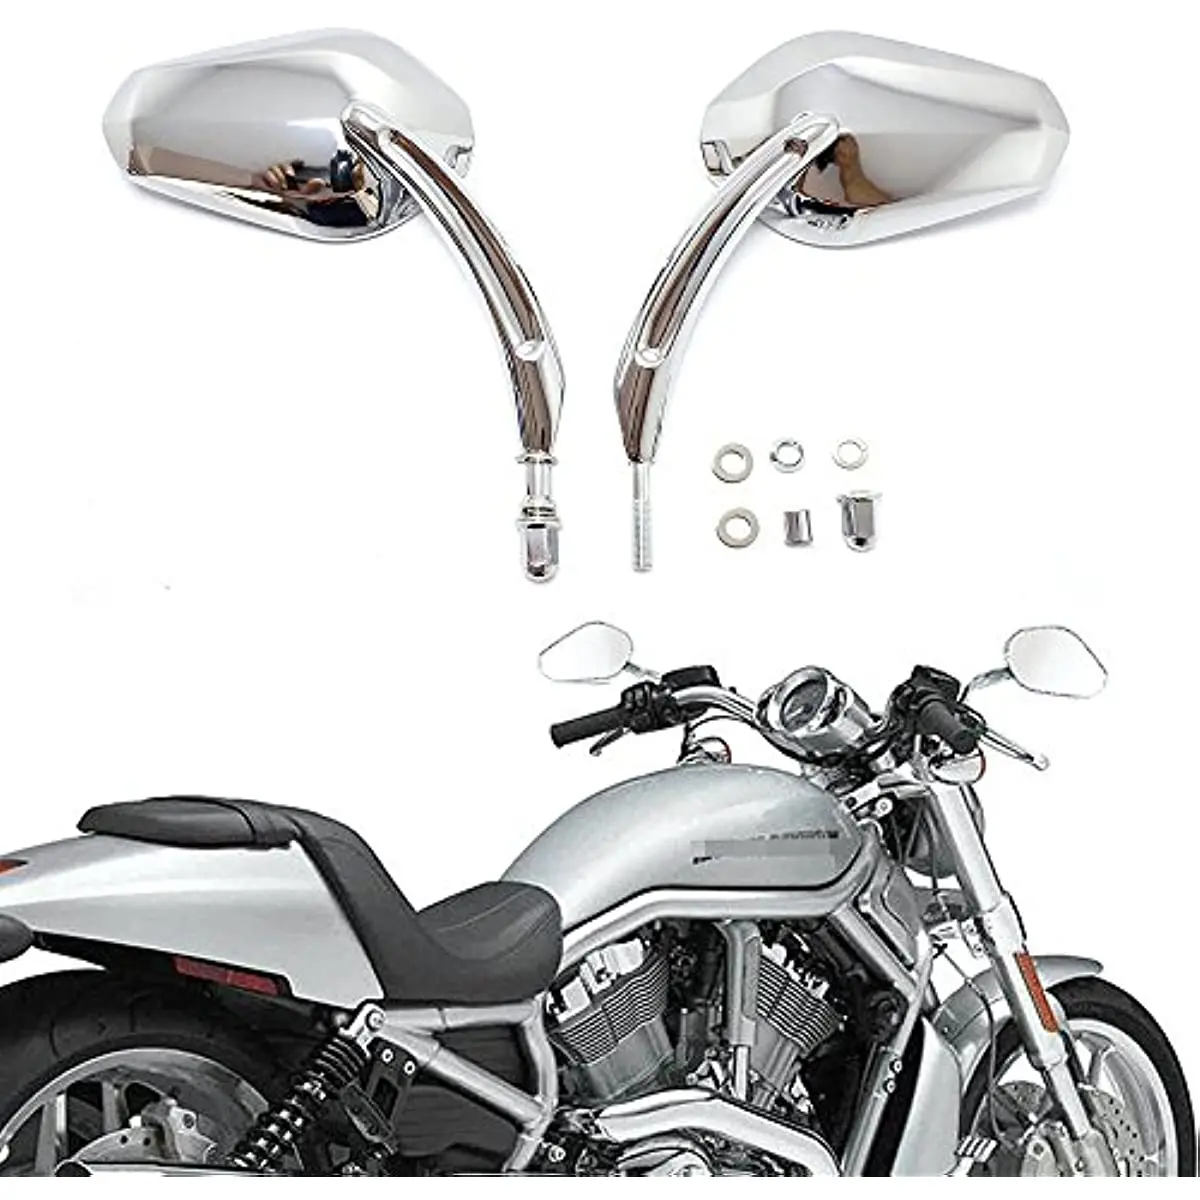 

LAICY Motorcycle Sportster Side Mirrors Rear View for Harley Road King Street Electra Glide Road Glide Dyna Softail 1982-2018 19